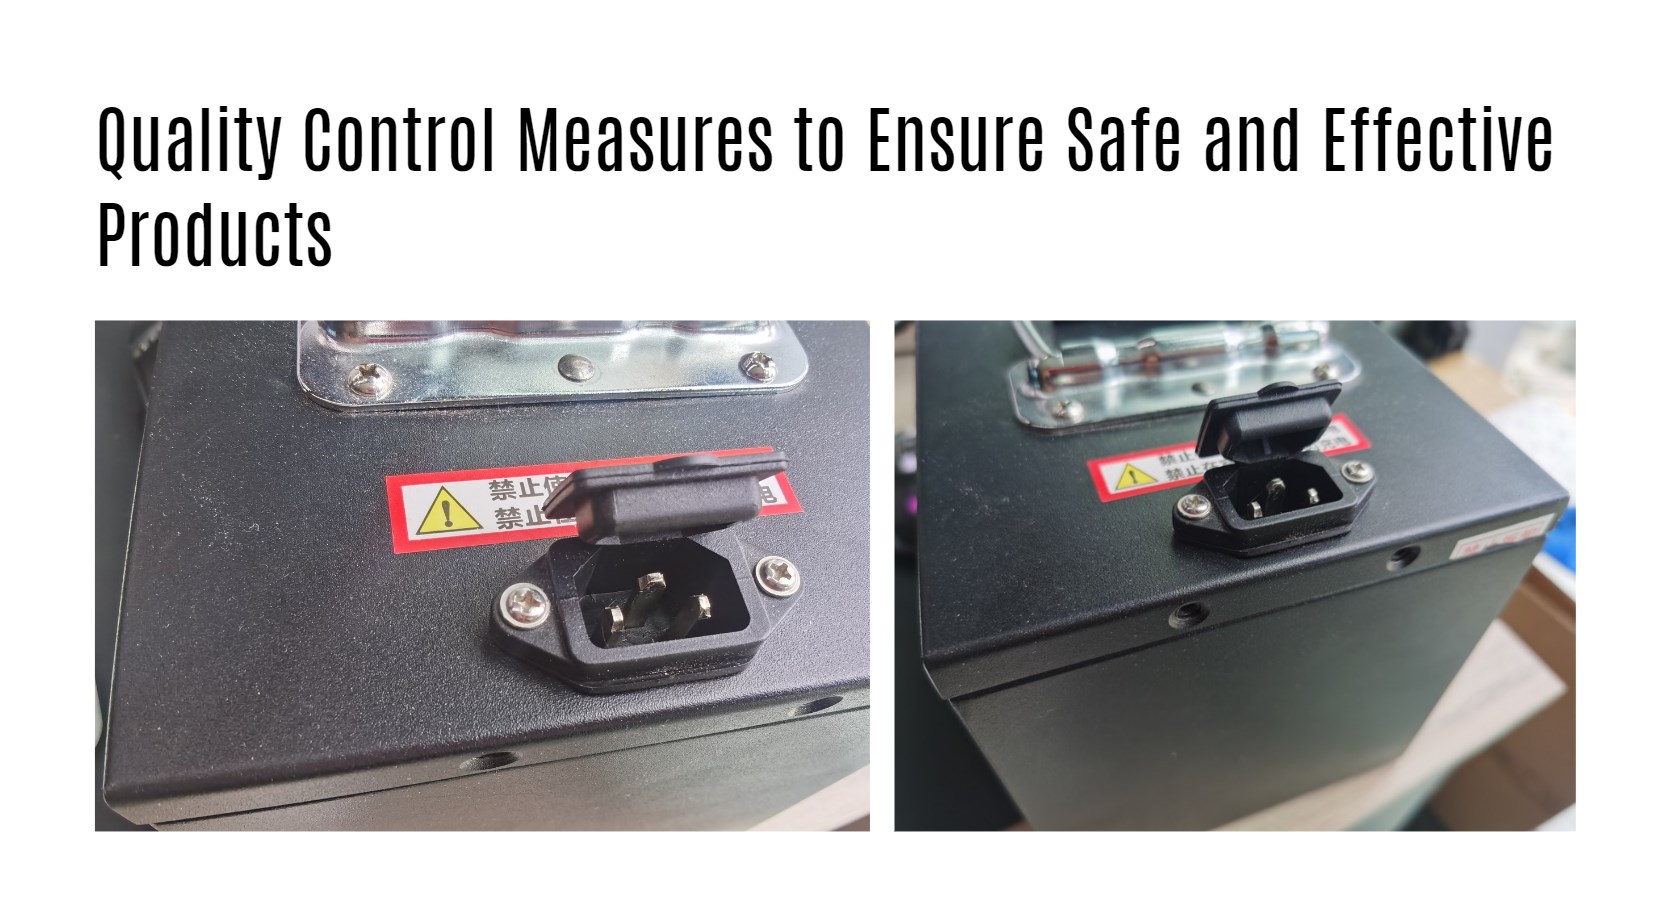 Quality Control Measures to Ensure Safe and Effective Products